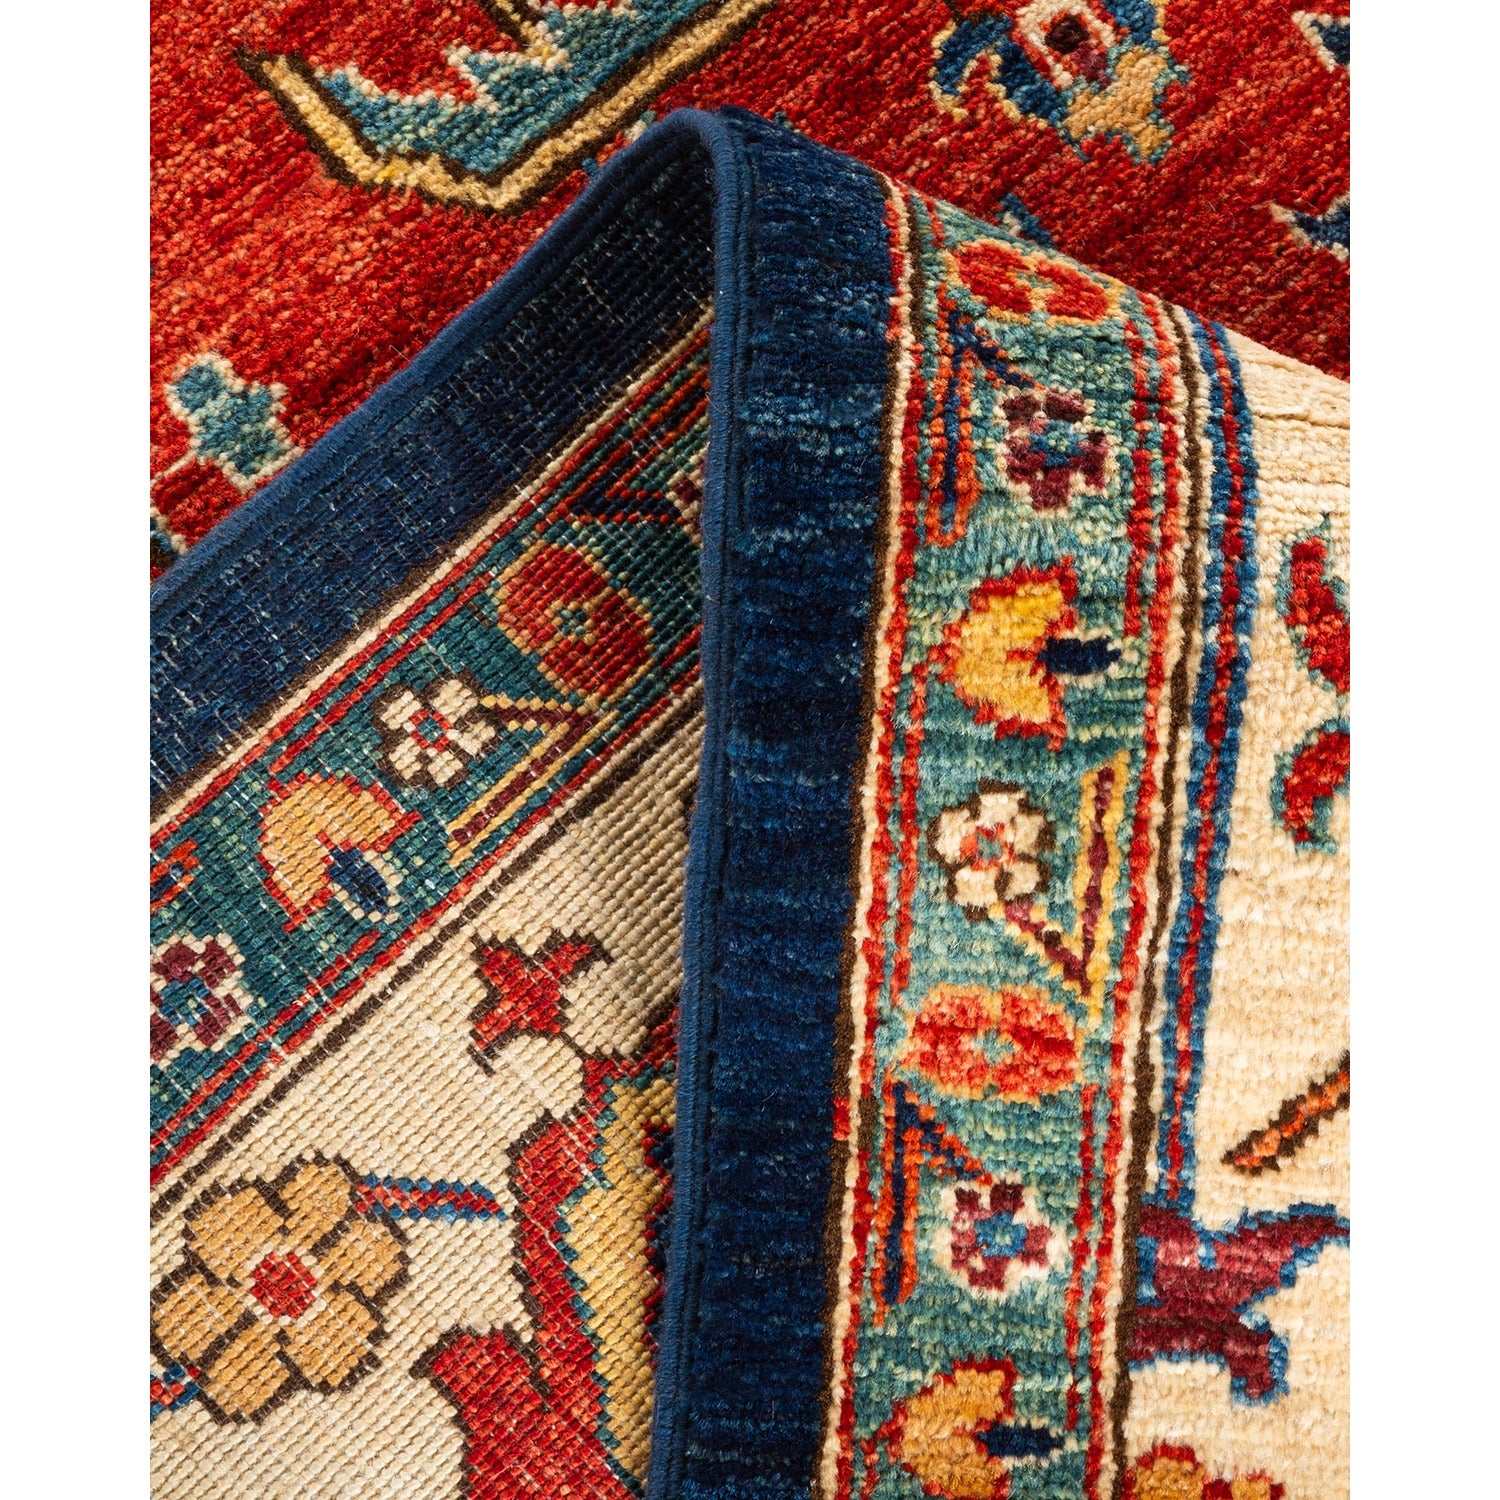 Vibrant and intricate Oriental rug showcases rich colors and patterns.